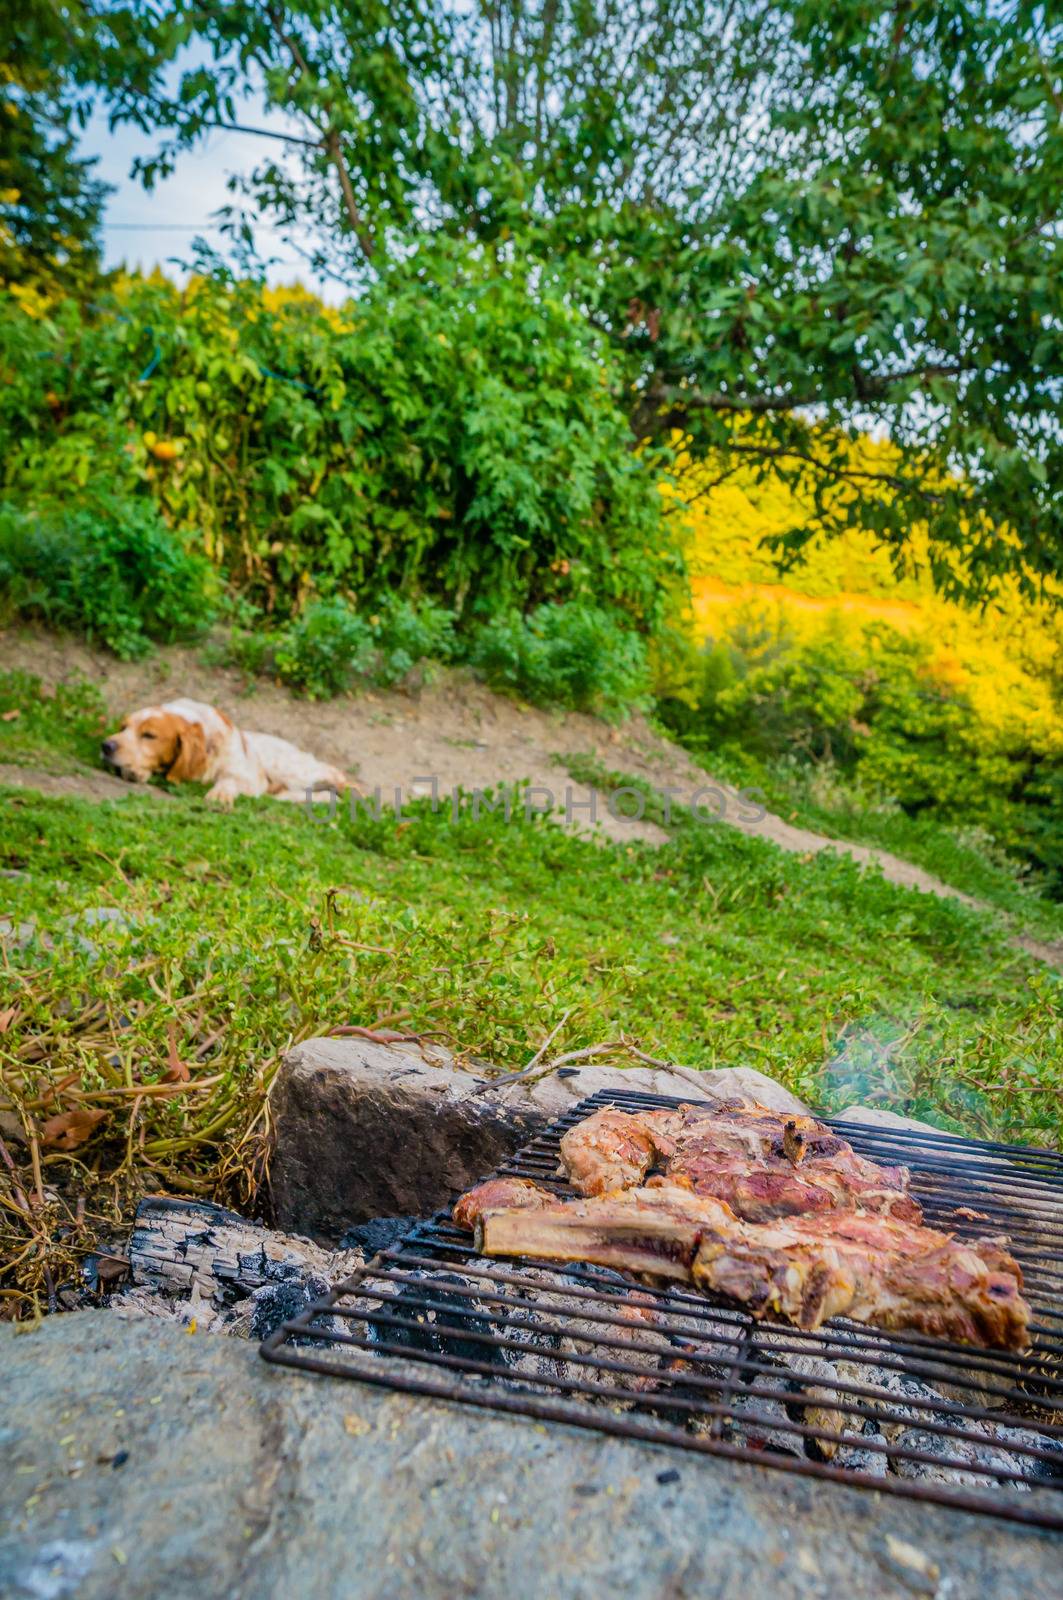 Dog waiting for meat on a barbecue to finish cooking